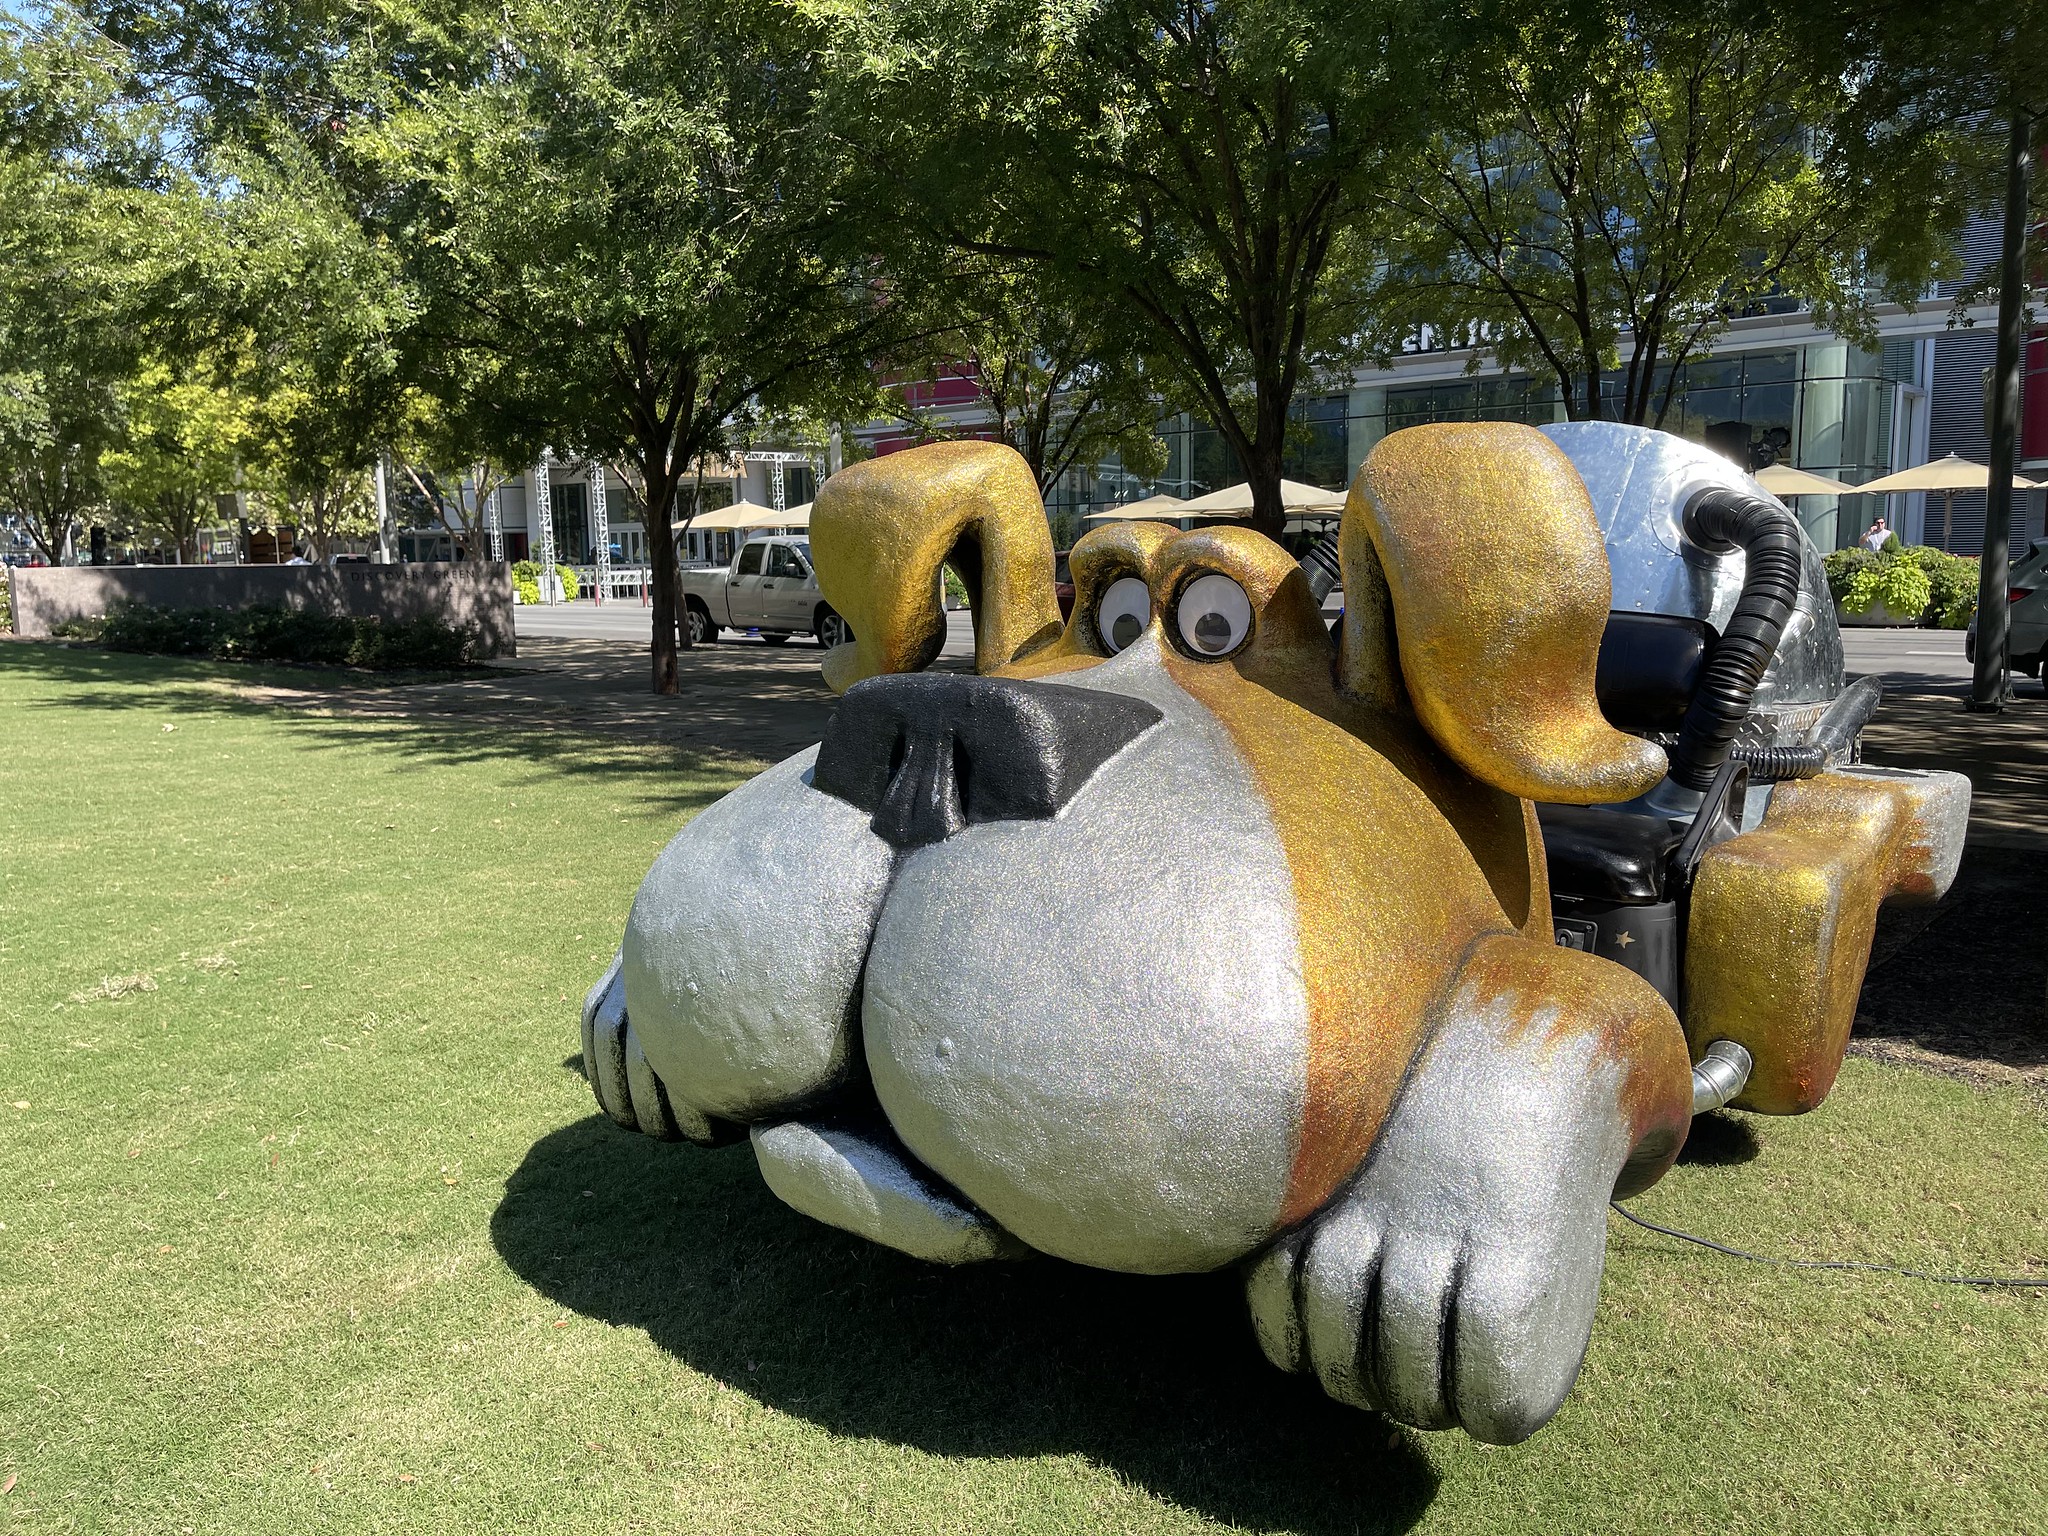 Rocket Dog is an art cart created by Rebecca Bass. It is seen at Discovery Green